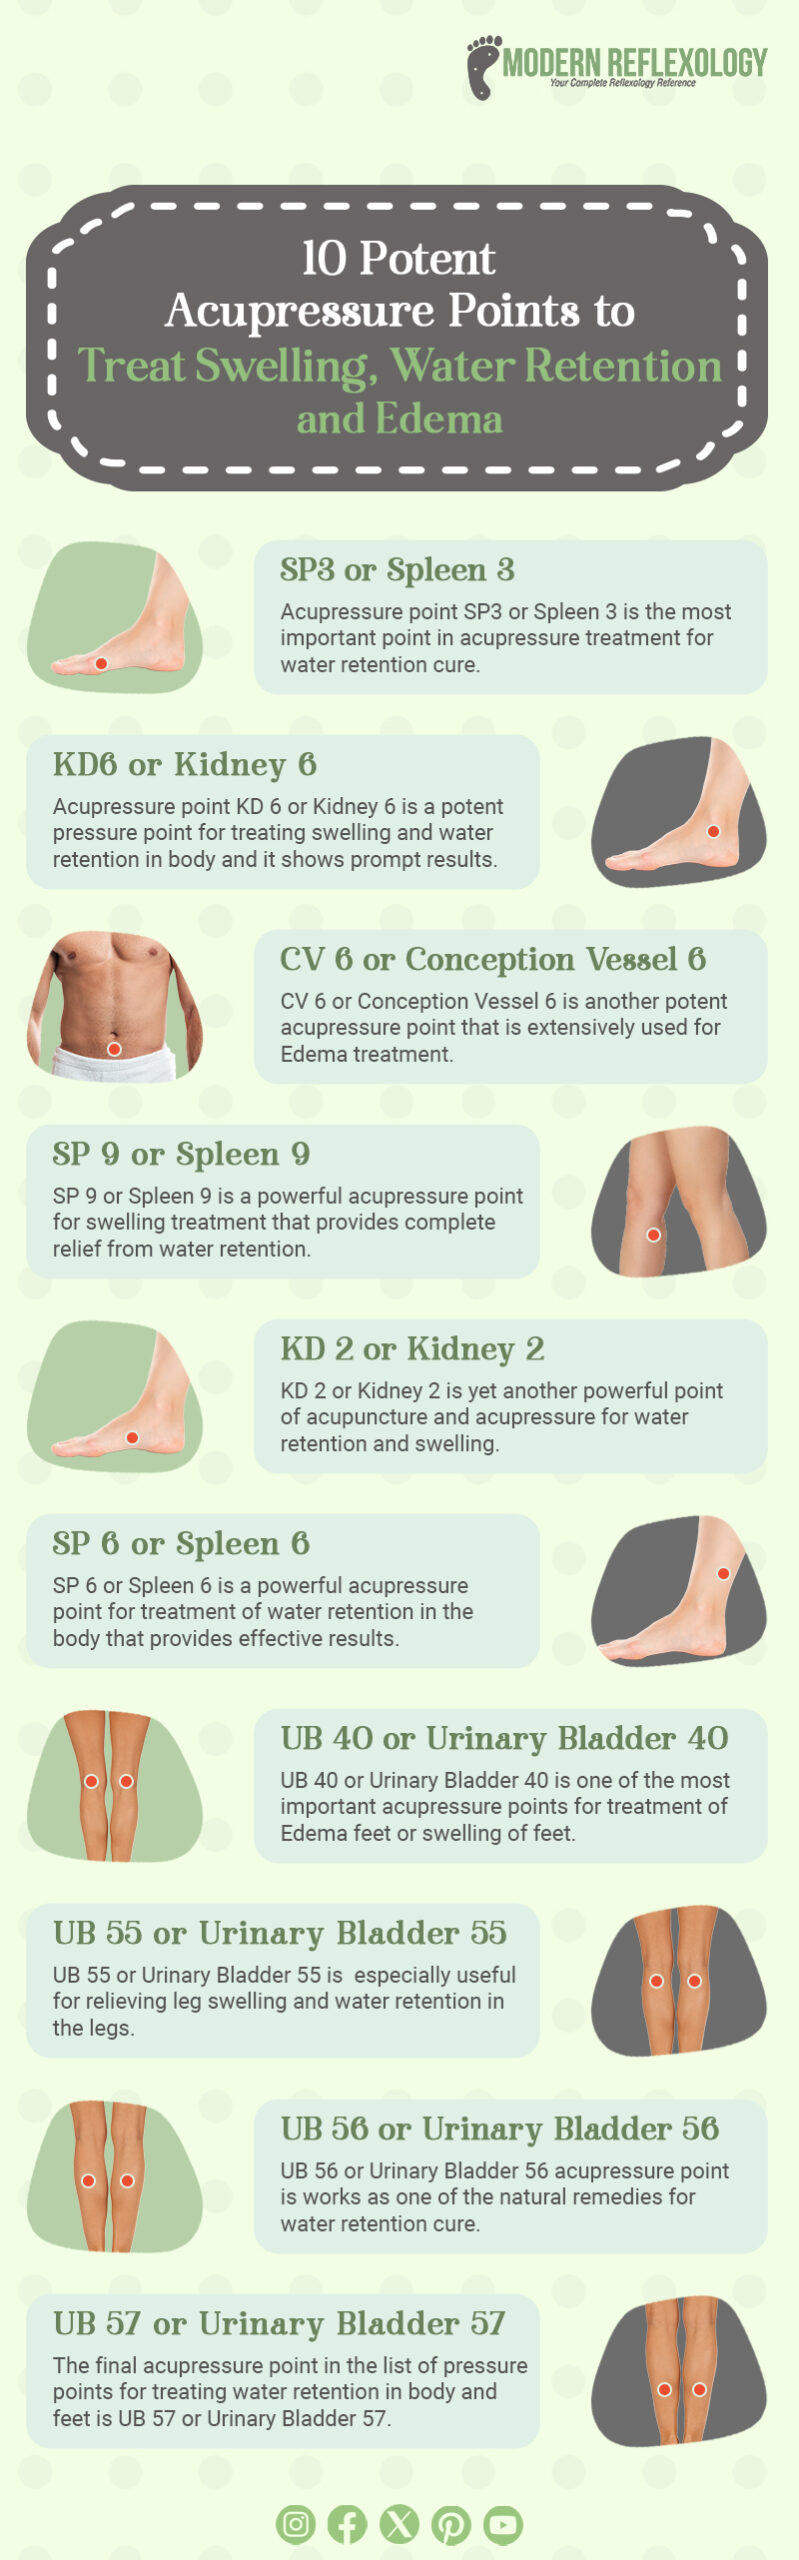 Infographic Acupressure Points to Treat Swelling, Water Retention, and Edema